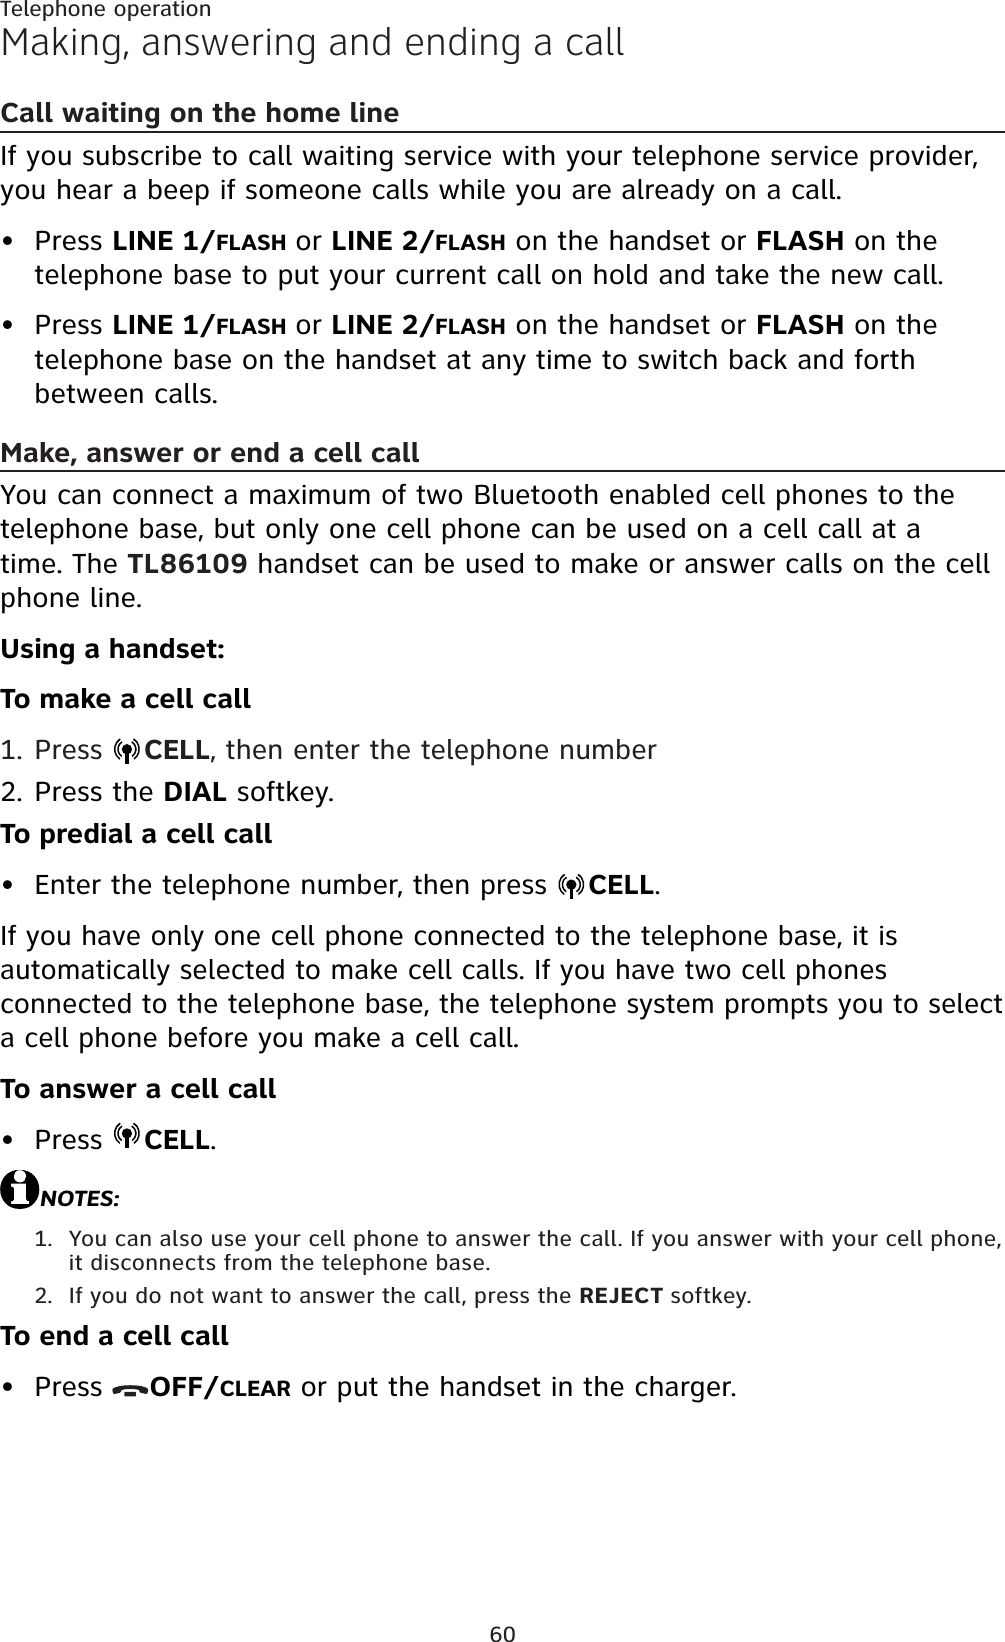 60Telephone operationMaking, answering and ending a callCall waiting on the home lineIf you subscribe to call waiting service with your telephone service provider, you hear a beep if someone calls while you are already on a call.Press LINE 1/FLASH or LINE 2/FLASH on the handset or FLASH on the telephone base to put your current call on hold and take the new call.Press LINE 1/FLASH or LINE 2/FLASH on the handset or FLASH on the telephone base on the handset at any time to switch back and forth between calls.Make, answer or end a cell call You can connect a maximum of two Bluetooth enabled cell phones to the telephone base, but only one cell phone can be used on a cell call at a time. The TL86109 handset can be used to make or answer calls on the cell phone line.Using a handset:To make a cell callPress  CELL, then enter the telephone numberPress the DIAL softkey.To predial a cell callEnter the telephone number, then press  CELL.If you have only one cell phone connected to the telephone base, it is automatically selected to make cell calls. If you have two cell phones connected to the telephone base, the telephone system prompts you to select a cell phone before you make a cell call.To answer a cell callPress  CELL.NOTES:You can also use your cell phone to answer the call. If you answer with your cell phone, it disconnects from the telephone base.If you do not want to answer the call, press the REJECT softkey.To end a cell callPress  OFF/CLEAR or put the handset in the charger.••1.2.••1.2.•